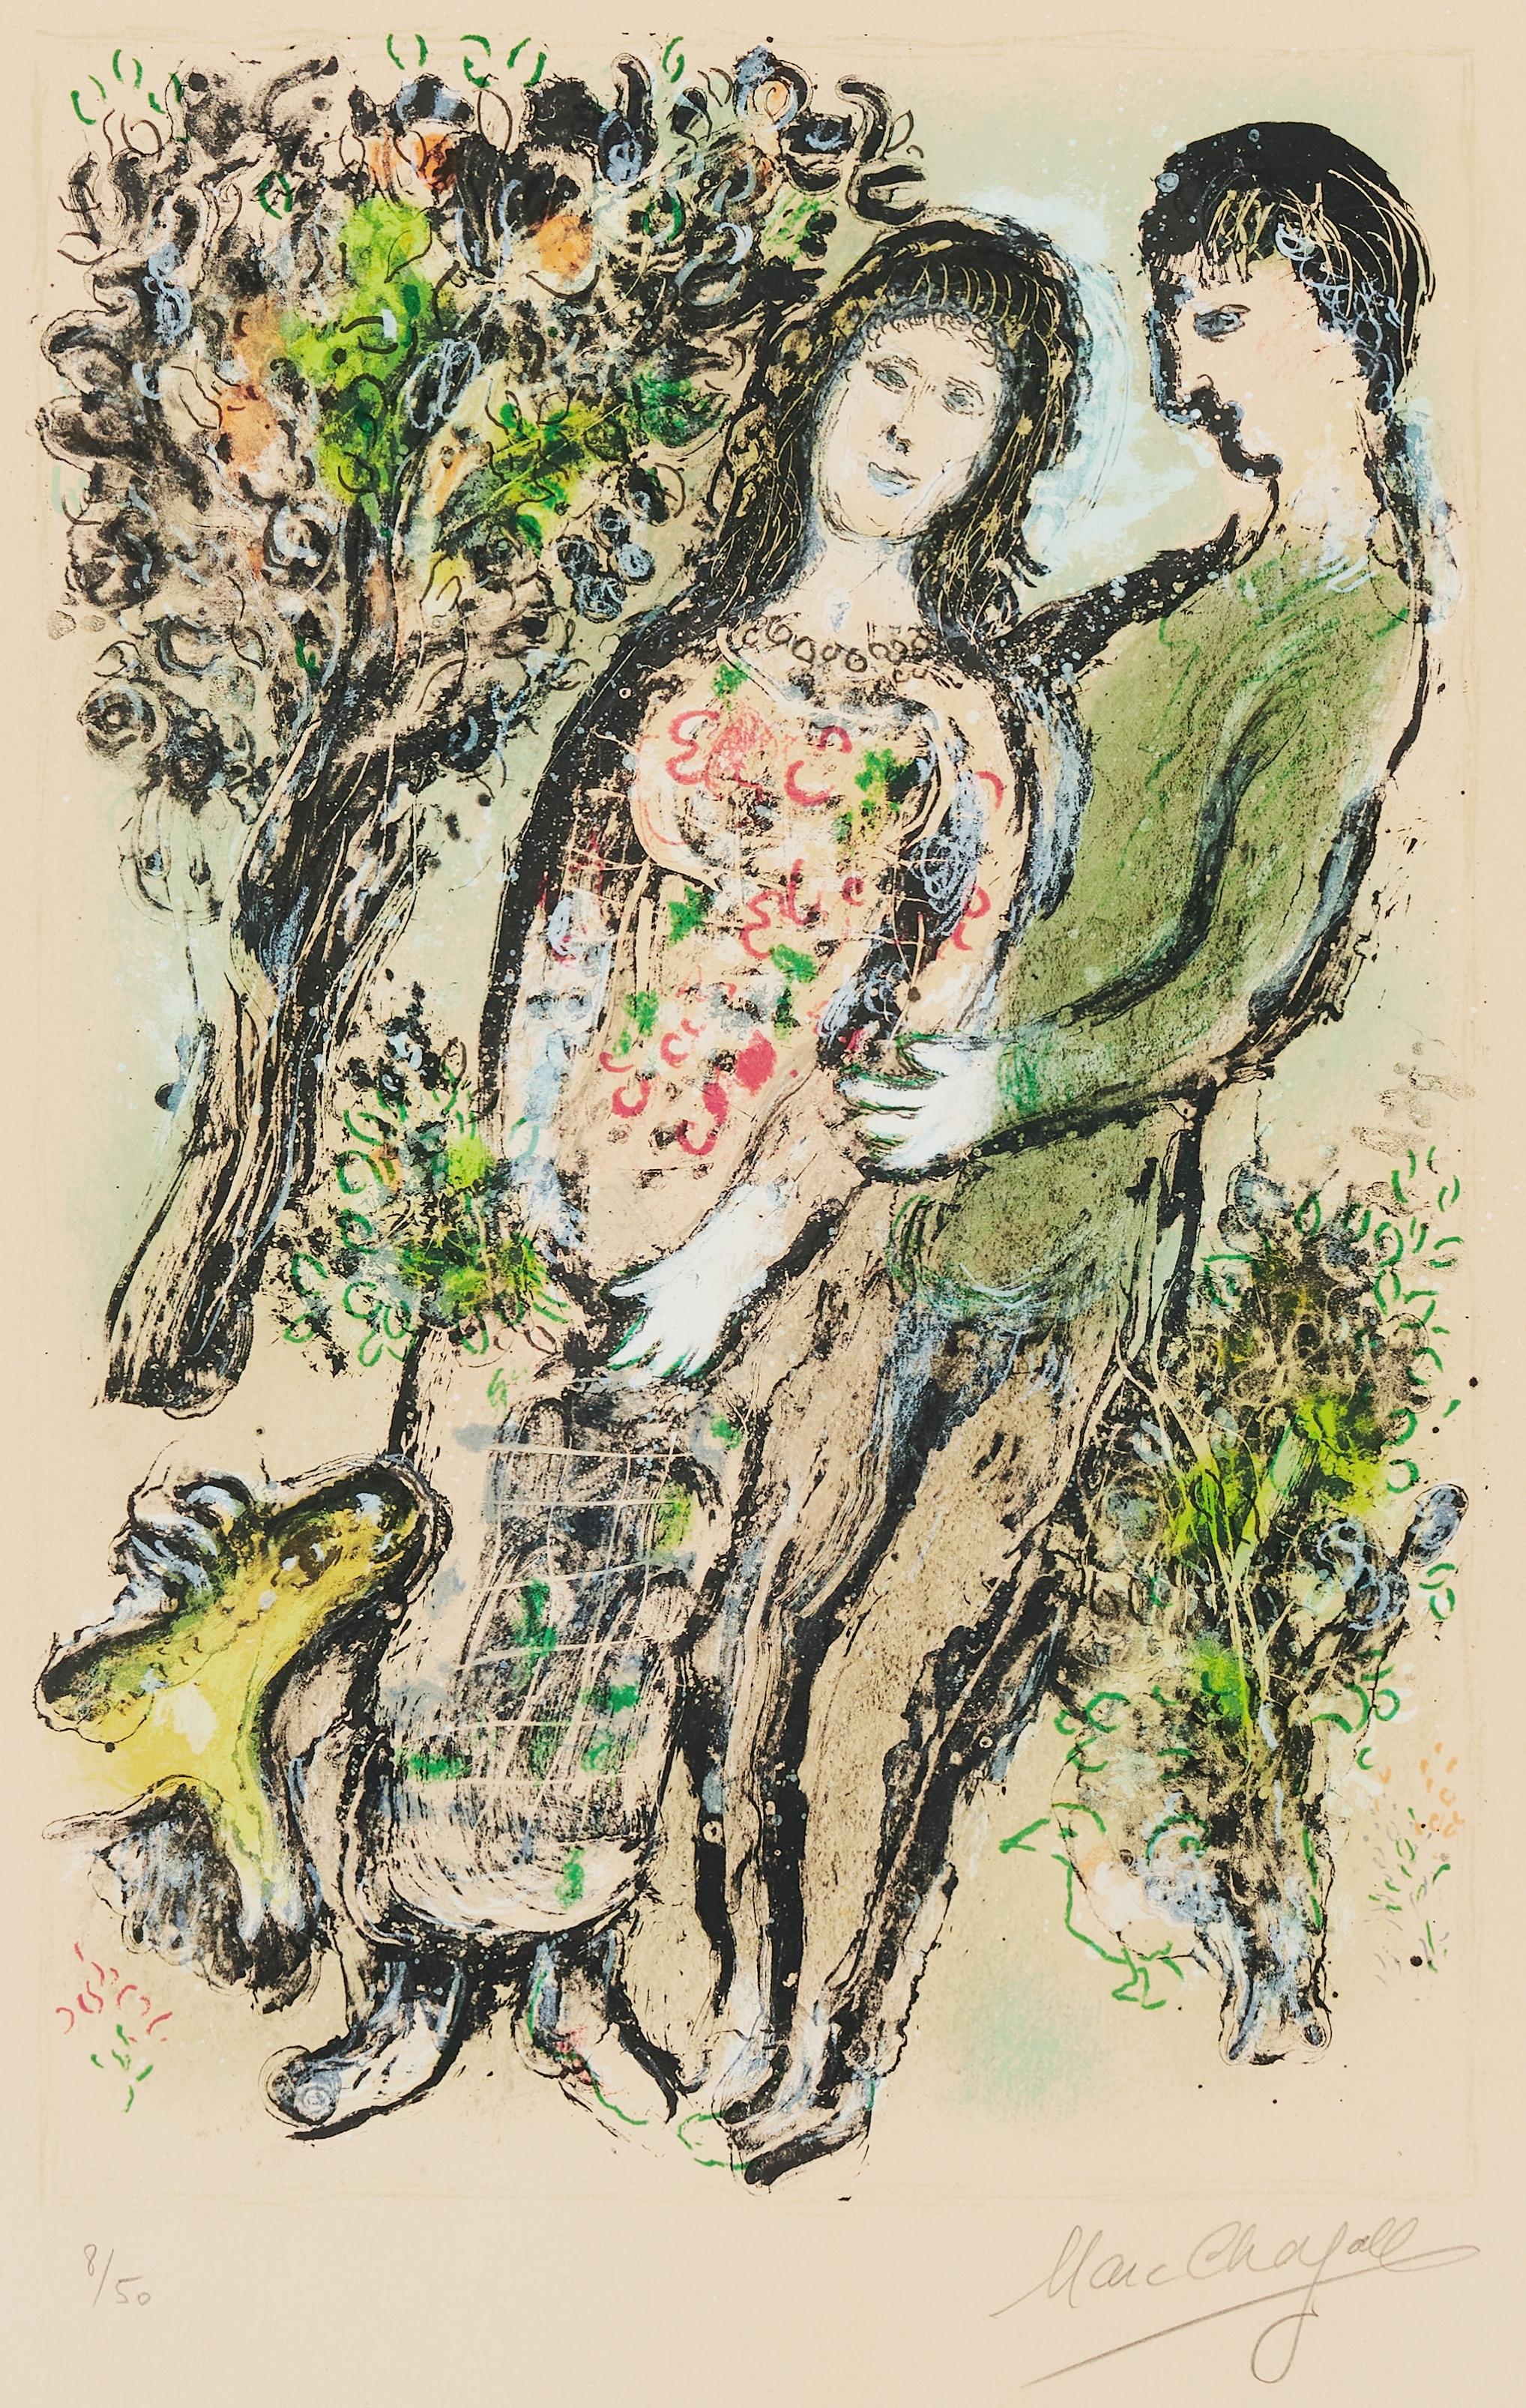 Marc Chagall (Russia/France 1887‑1985). 

”L’Oranger”. 

Year 1975

Signed and numbered Marc Chagall 8/50. Colour lithograph printed on Arches.
Framed 35.5H x 28W x 2D Inches
Illustration Size 48 x 32 cm
Sheet Size 65 x 47 cm.

Mourlot 737

Marc